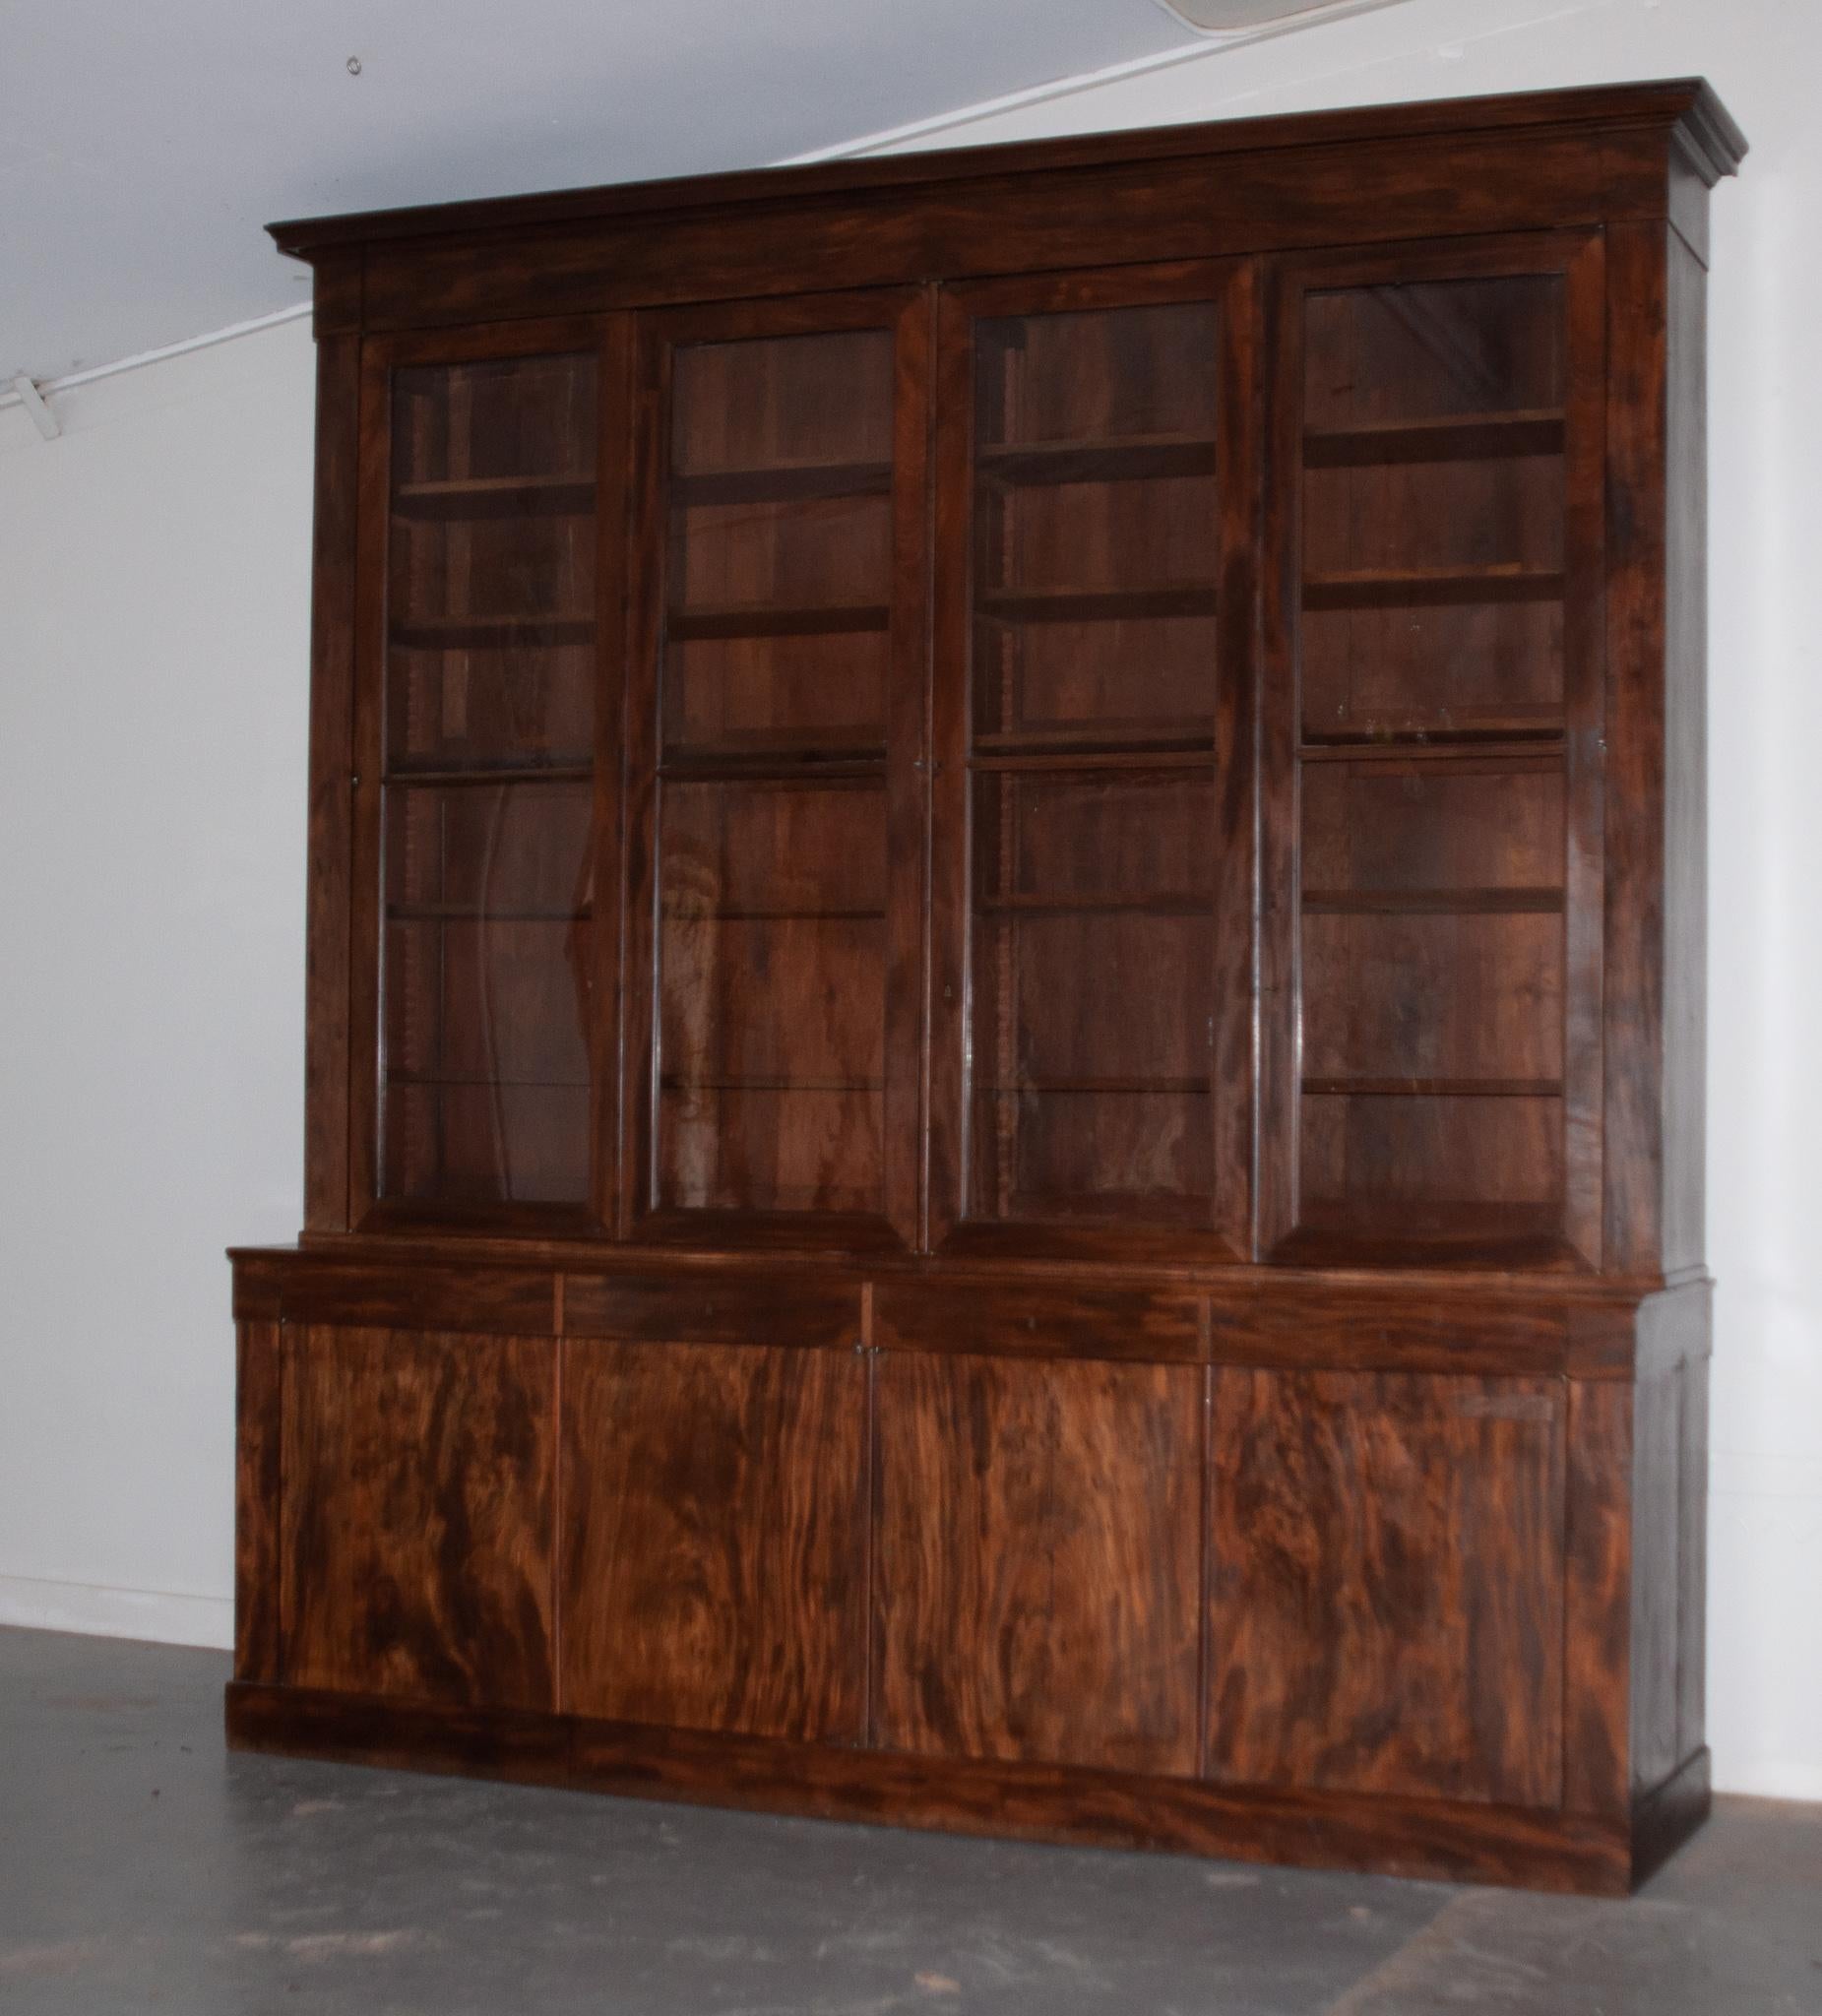 This fabulously large bibliotheque was crafted in France in the 1800s and provides a great amount of shortage space. The top measures 82-¼”“H x 116-½“W x 18-¼”D and houses 5 finished adjustable shelves behind the original wavy glass doors. The